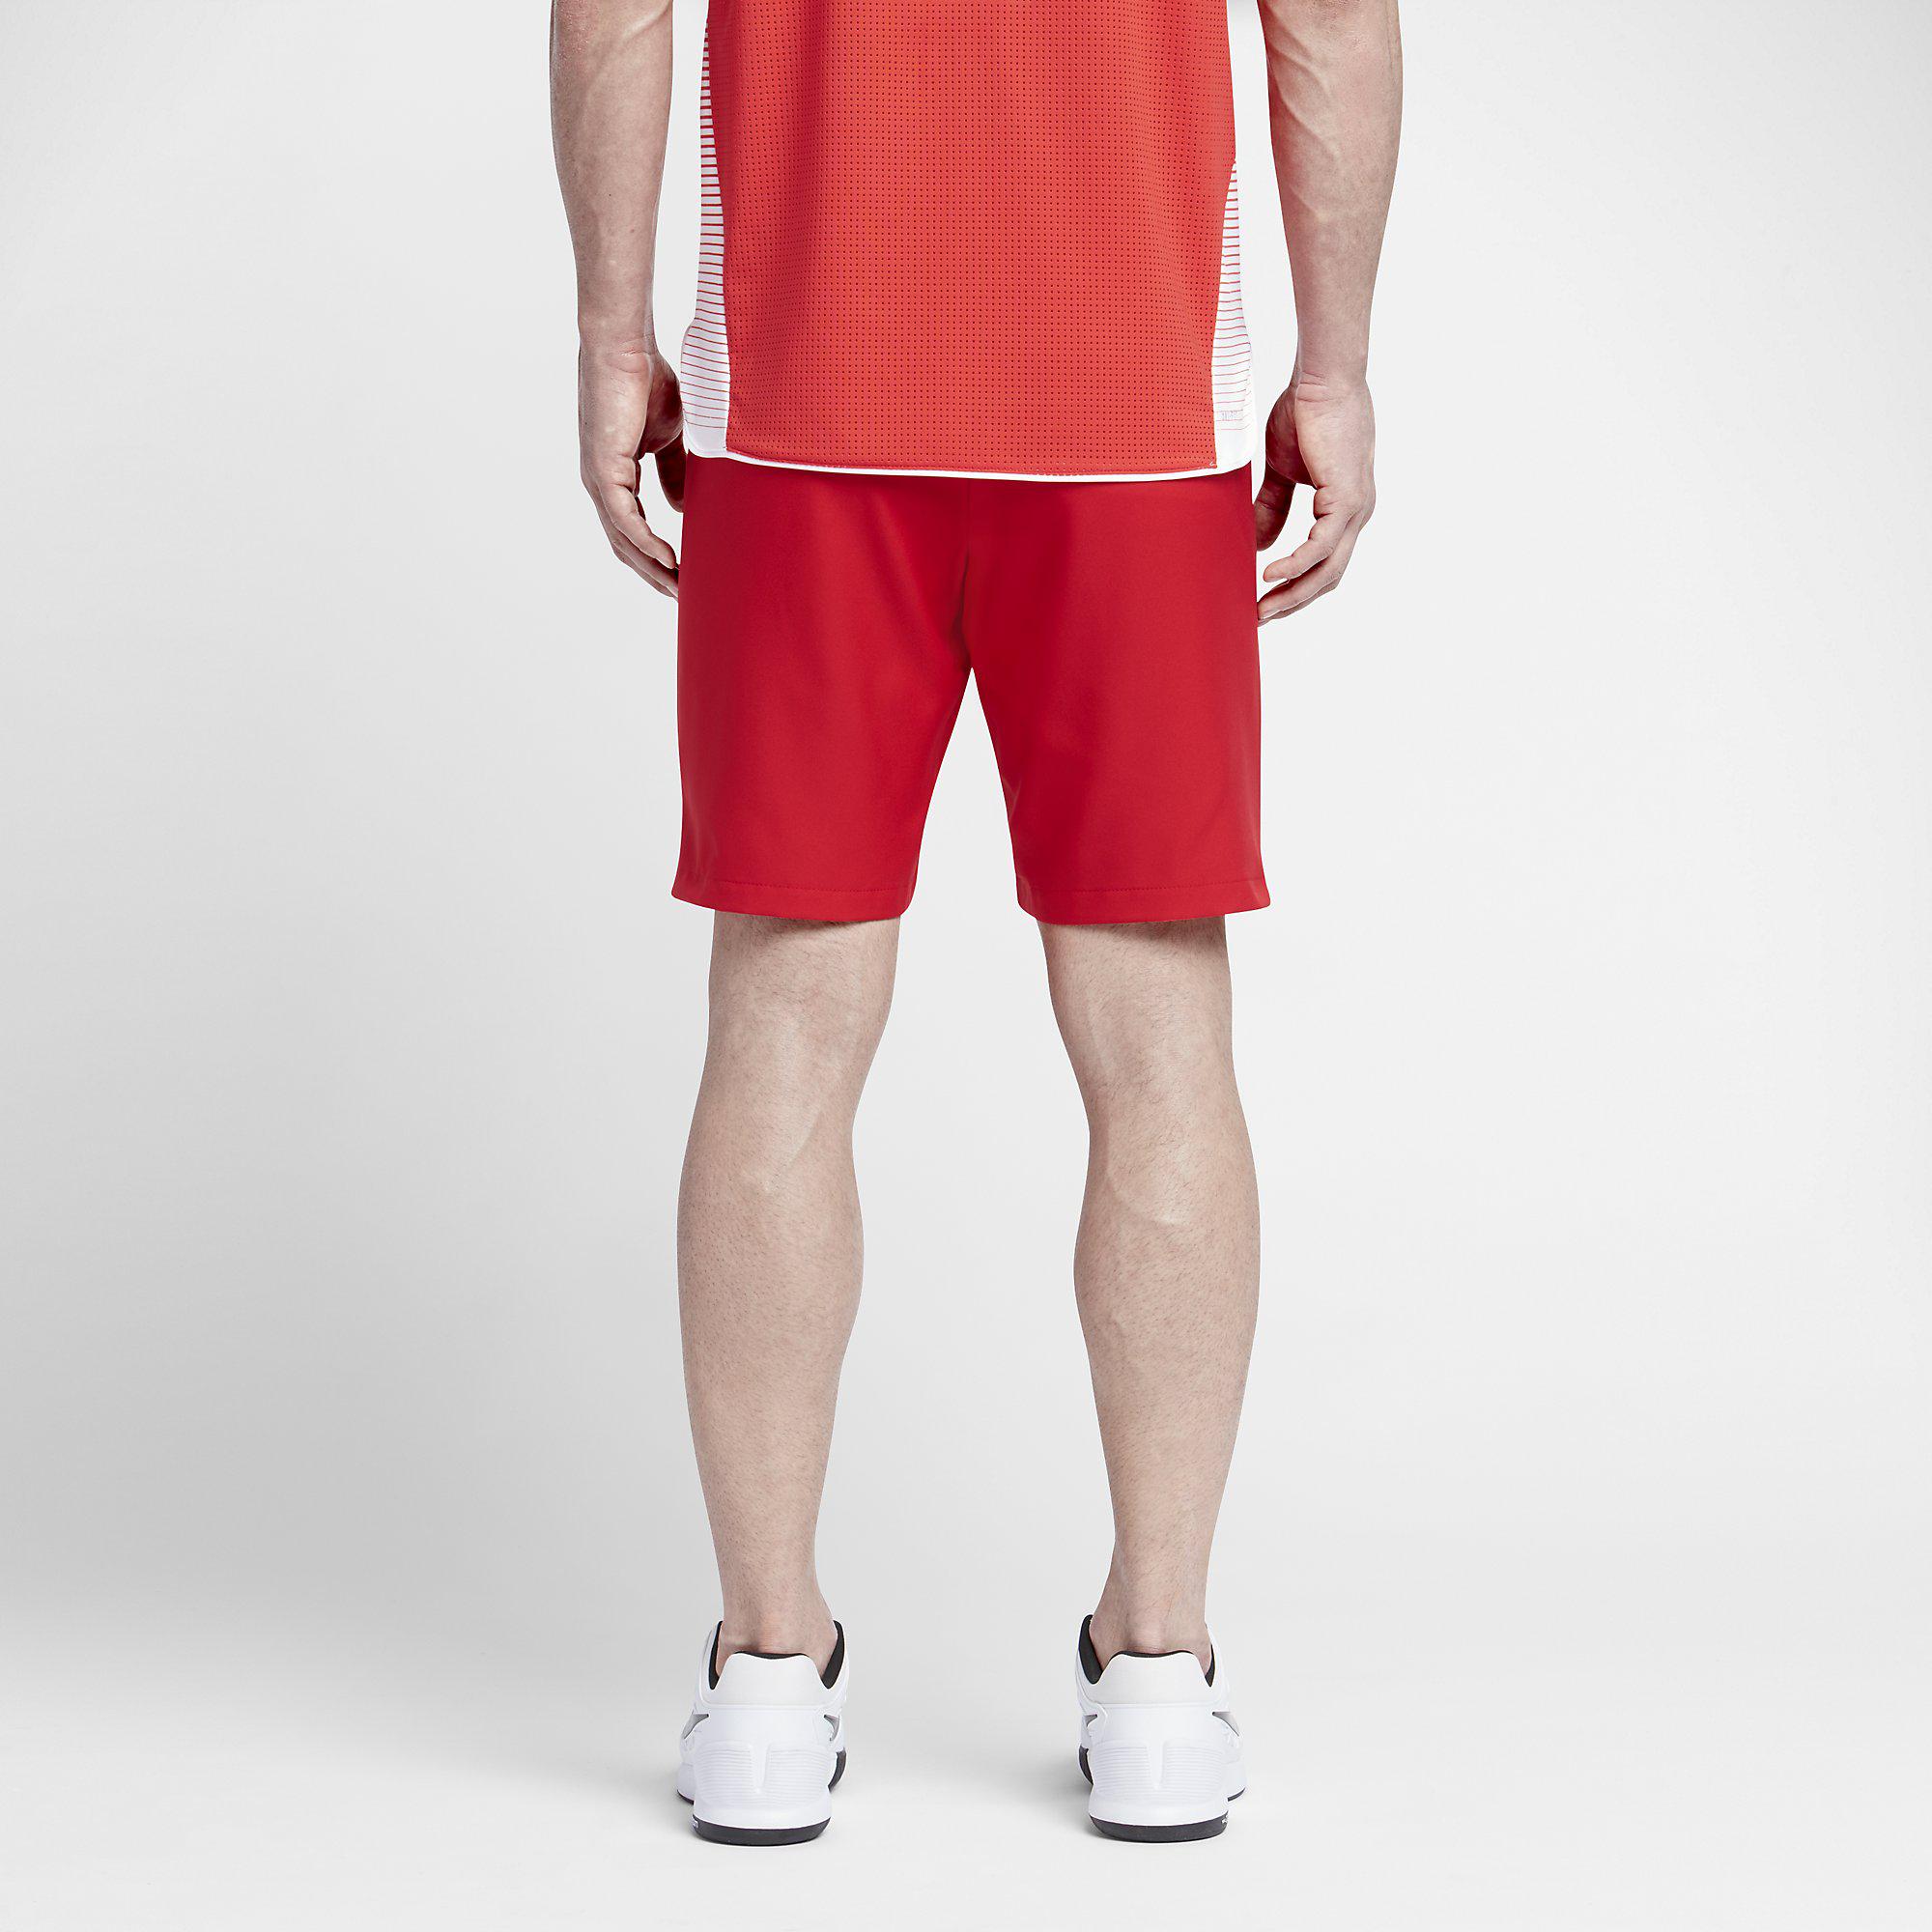 Nike Mens Court Graphic 9 Inch Tennis Shorts - University Red ...